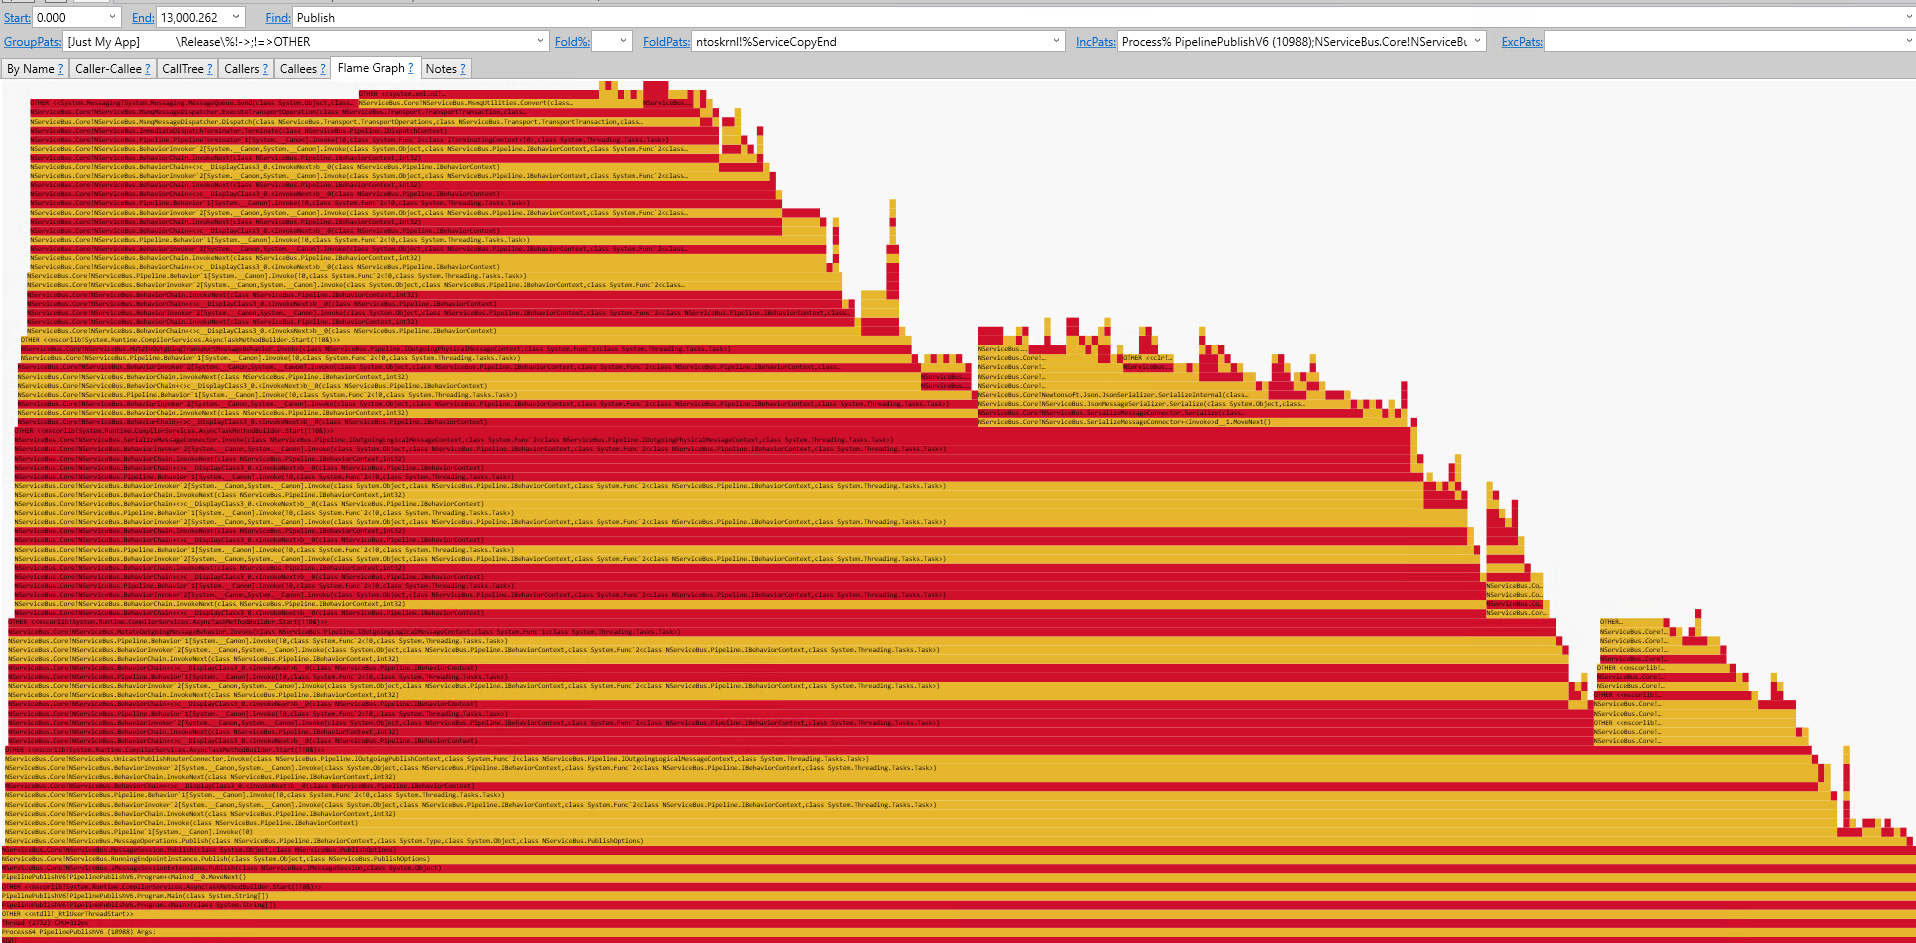 Pipeline publish CPU flamegraph overview